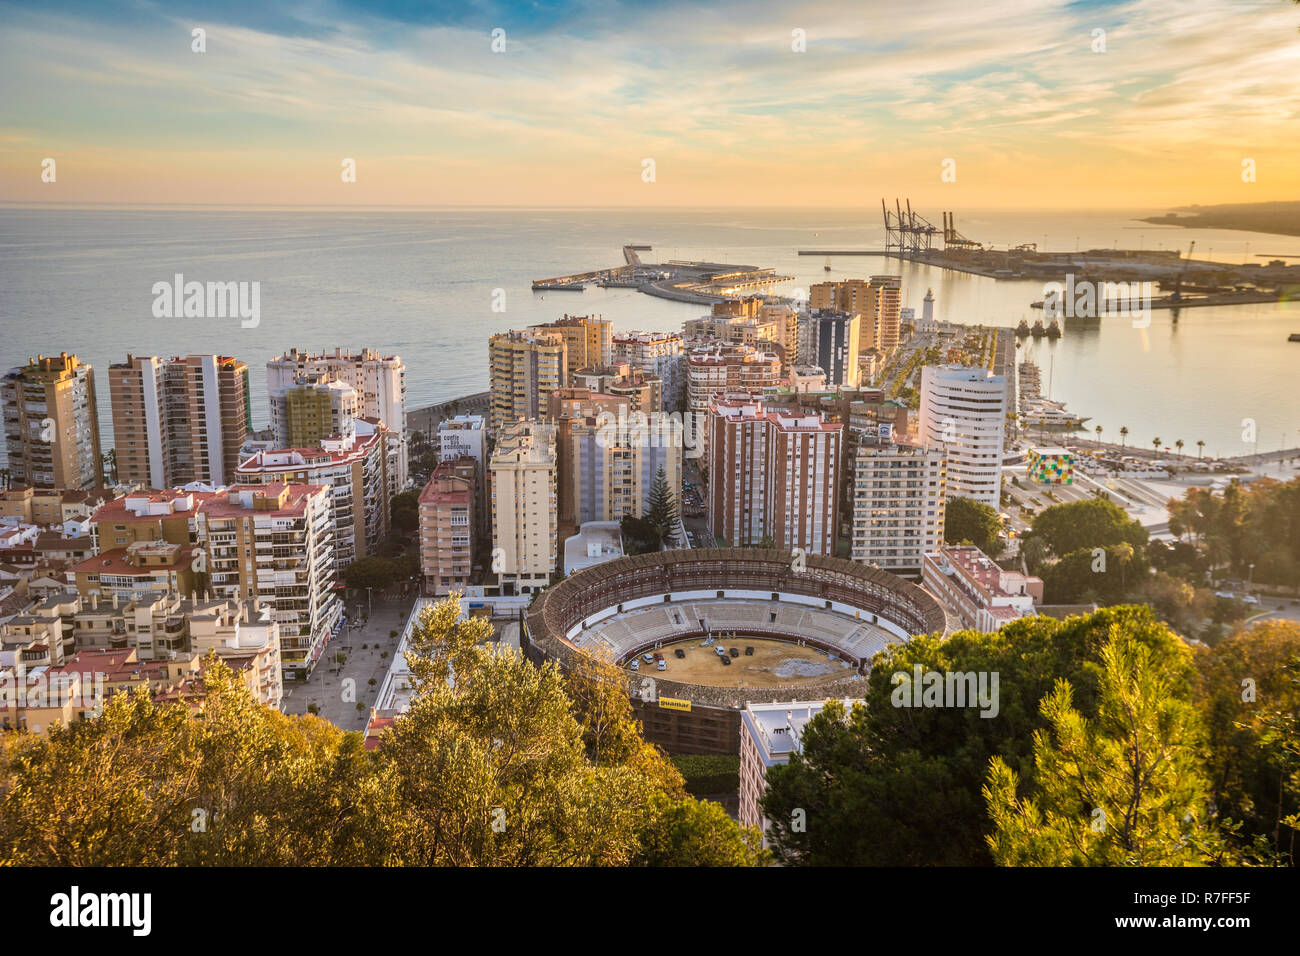 View of Port of Malaga in Spain Stock Photo